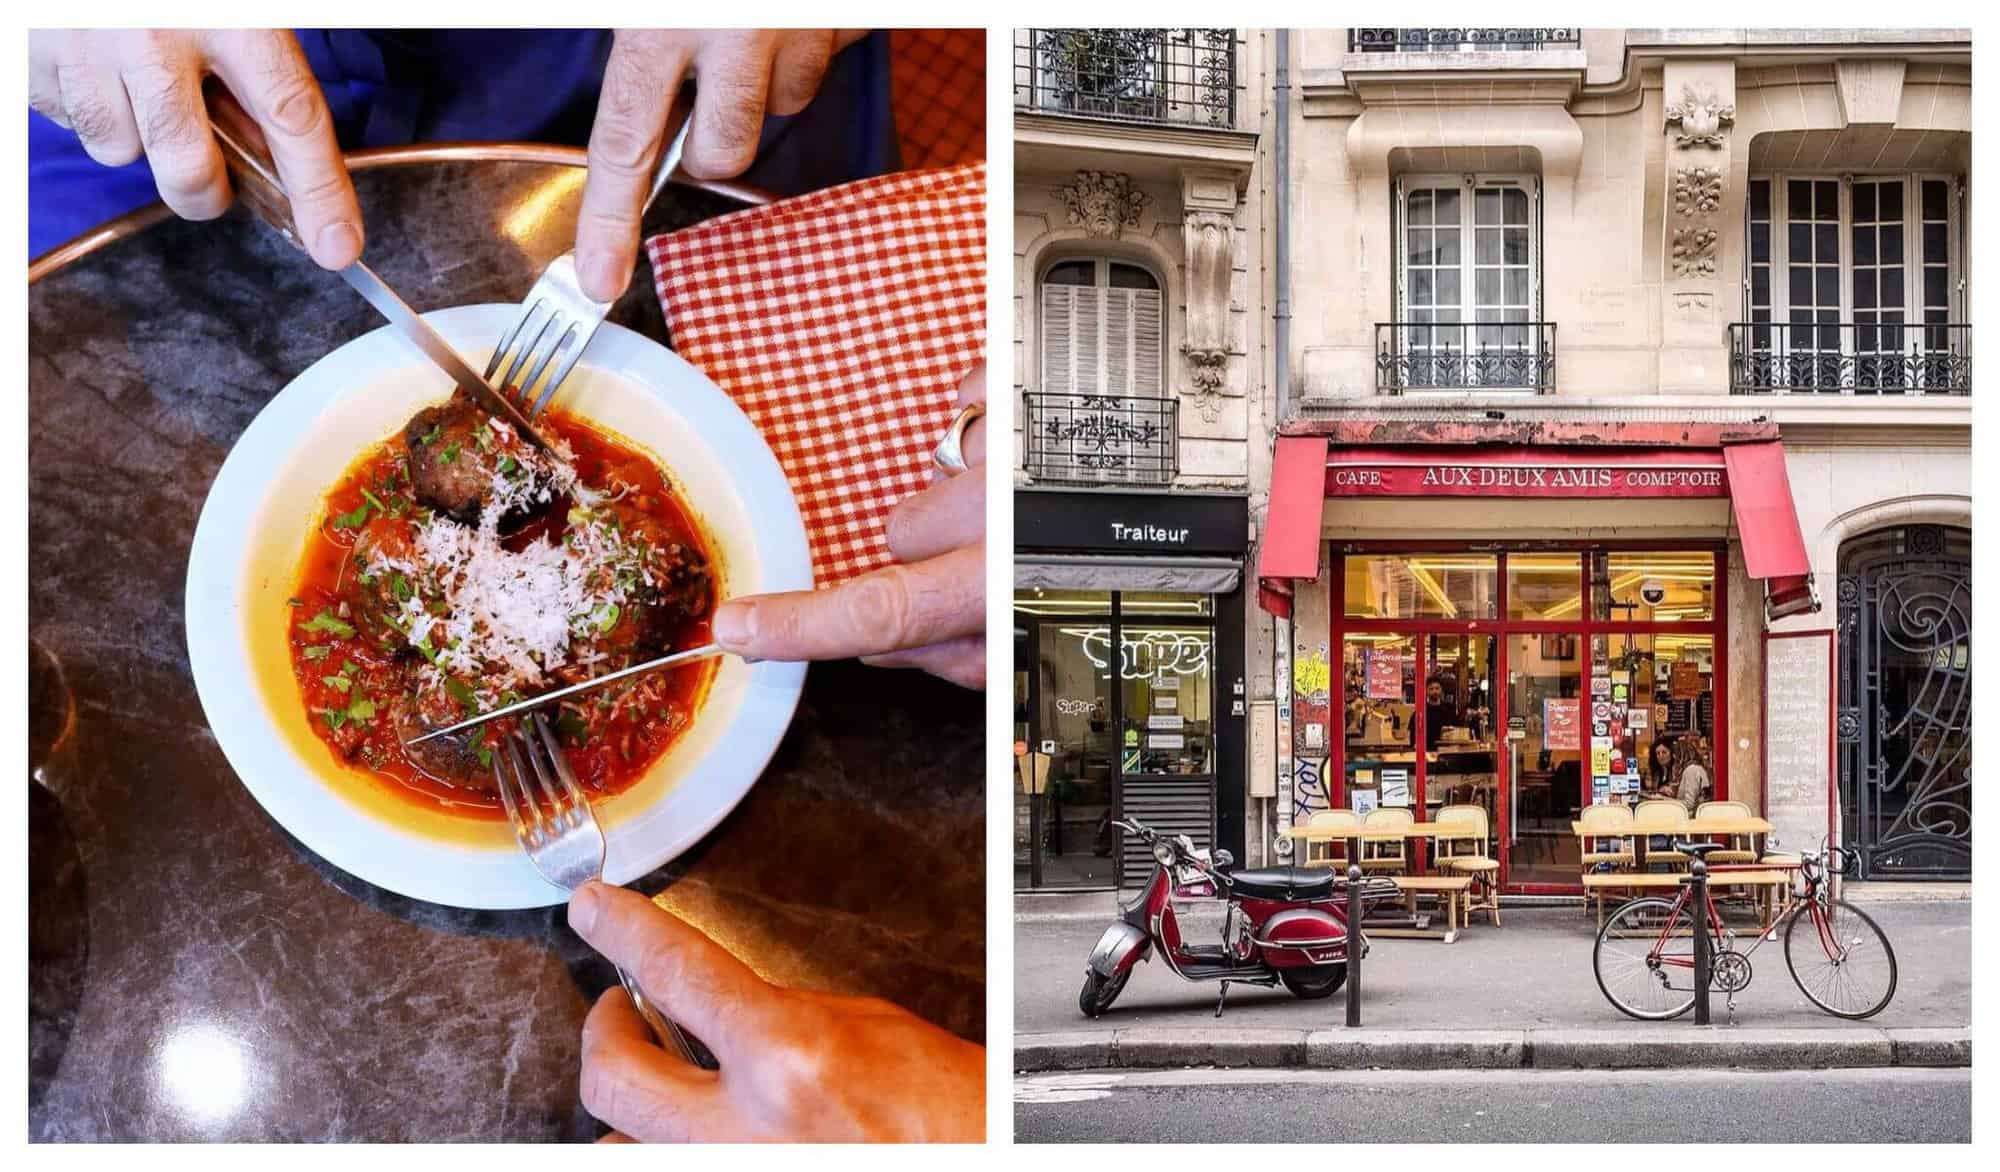 Left: two diners share a plate of meatballs in tomato sauce at Aux Deux Amis natural wine bar. Right: chairs, tables, and a motorcycle sit in front of Aux Deux Amis' shop front